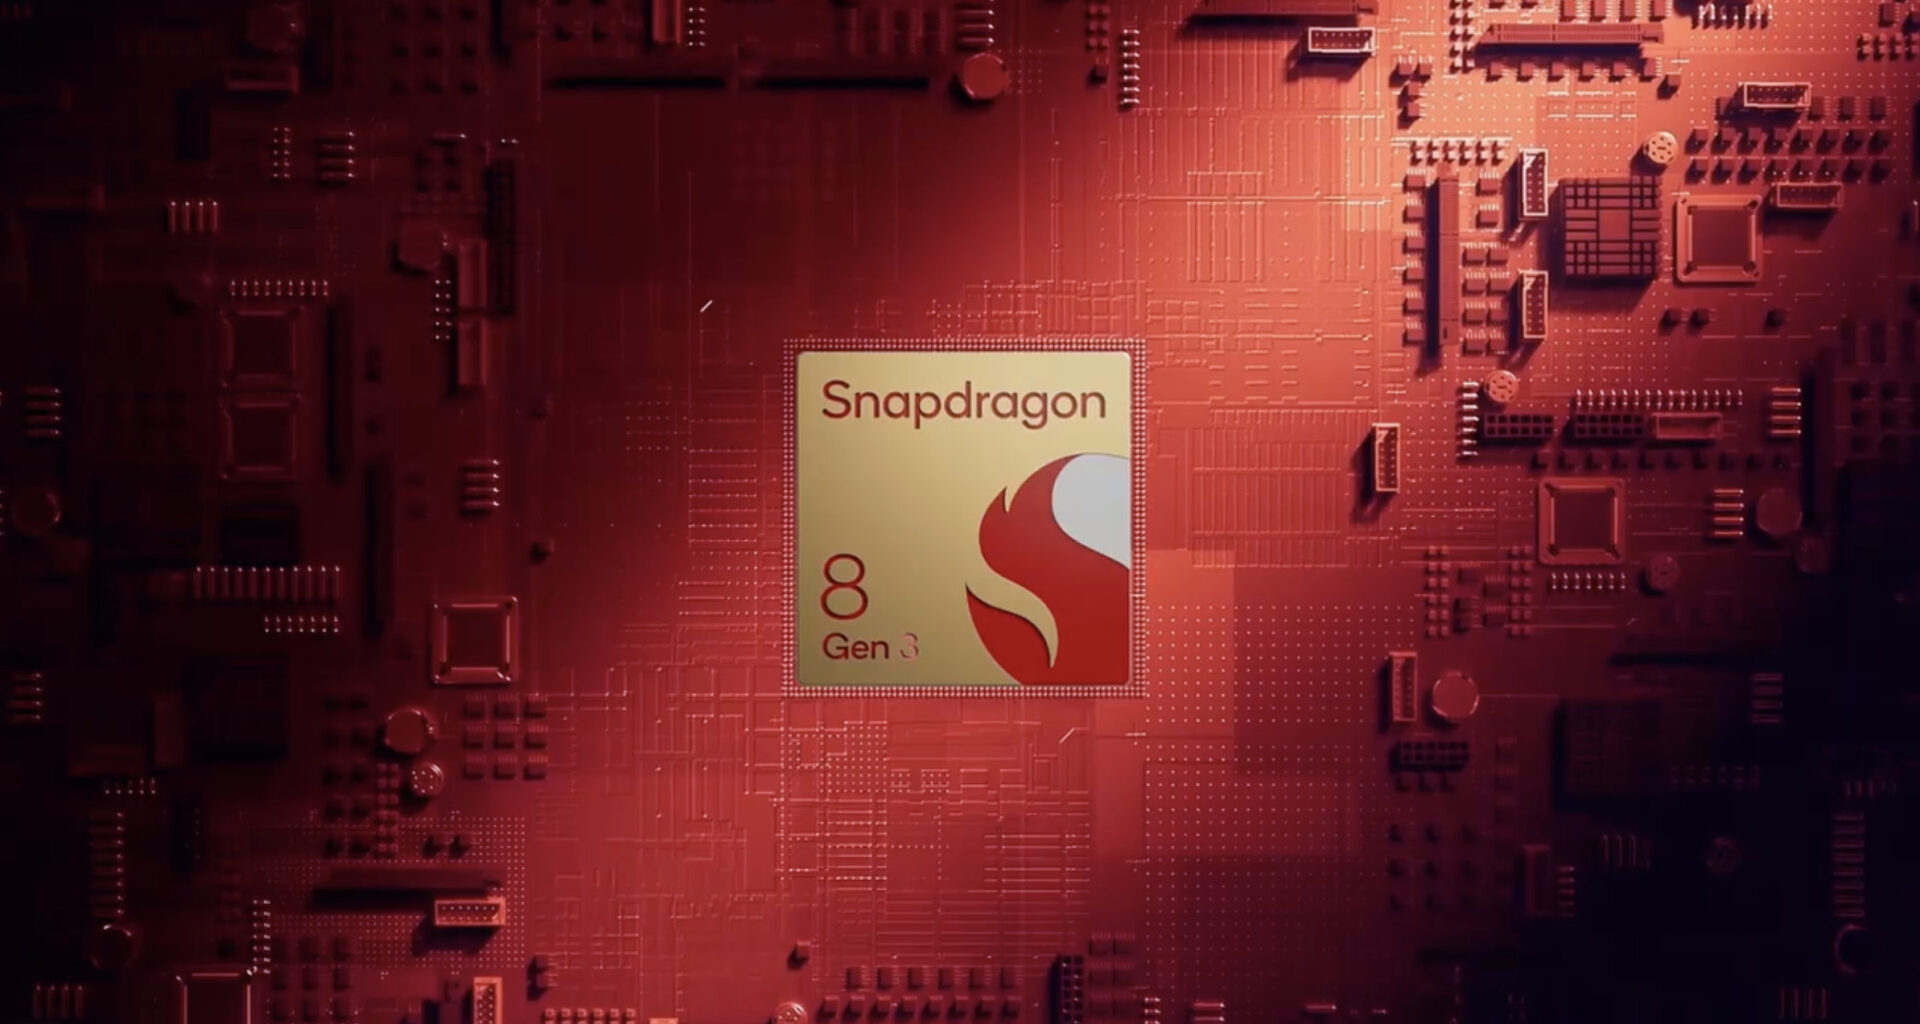 Qualcomm Snapdragon 8 Gen 3: Everything you need to know about the